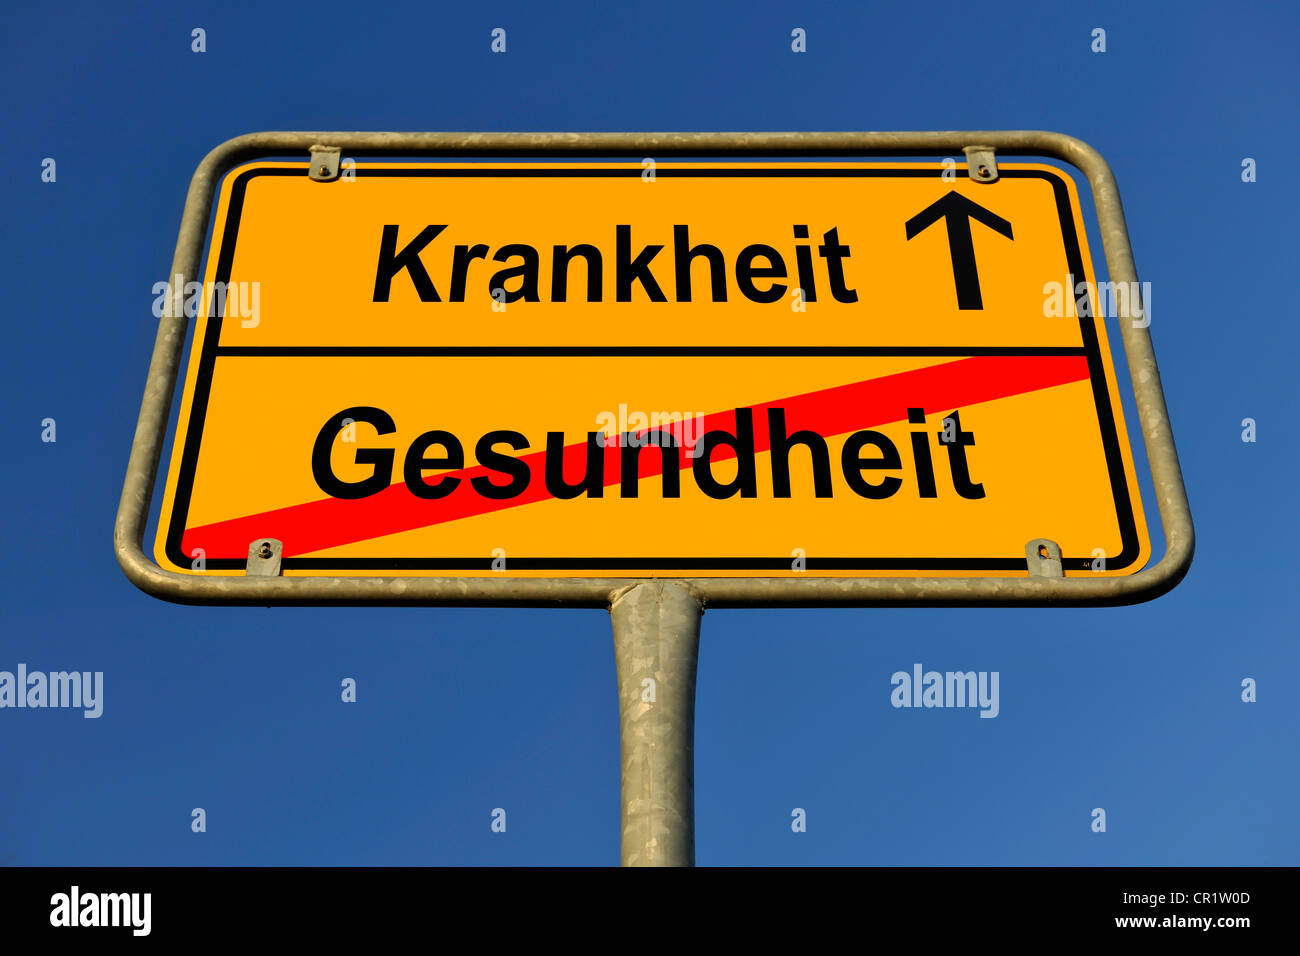 City limit sign, symbolic image for the way from Gesundheit to Krankheit, German for going from healthy to disease Stock Photo